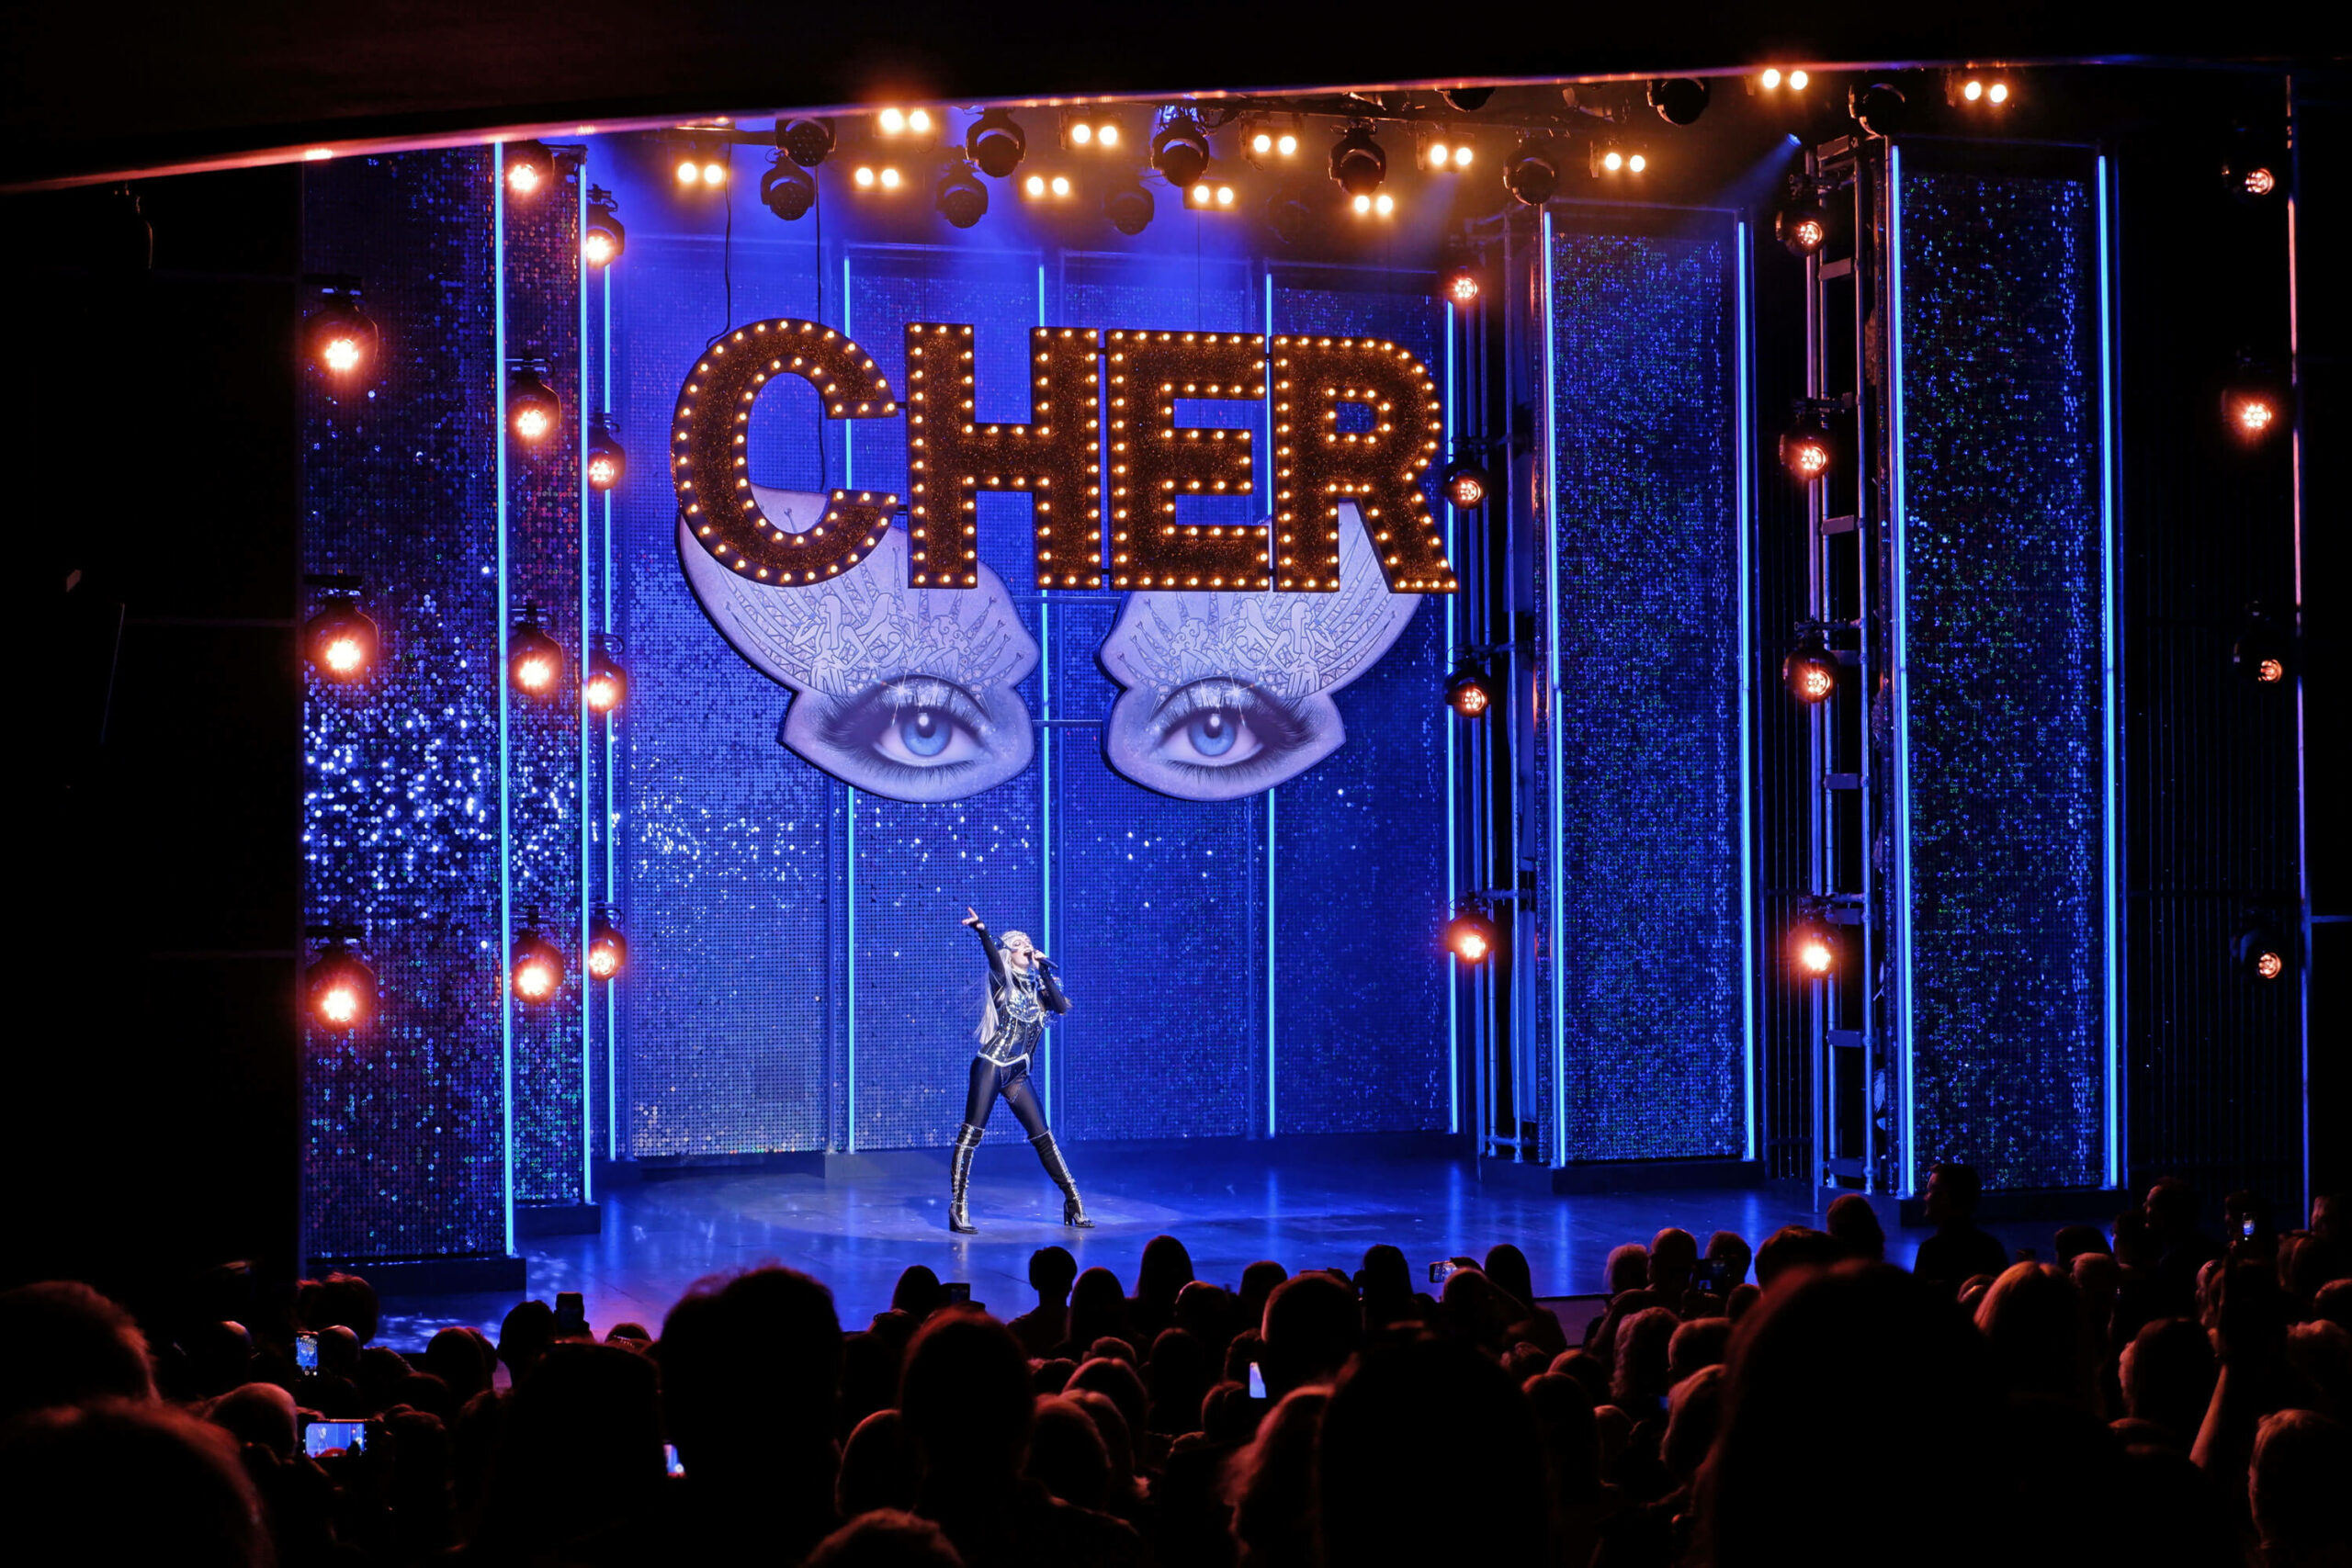 The Cher Show review (AD) Kat Masterson